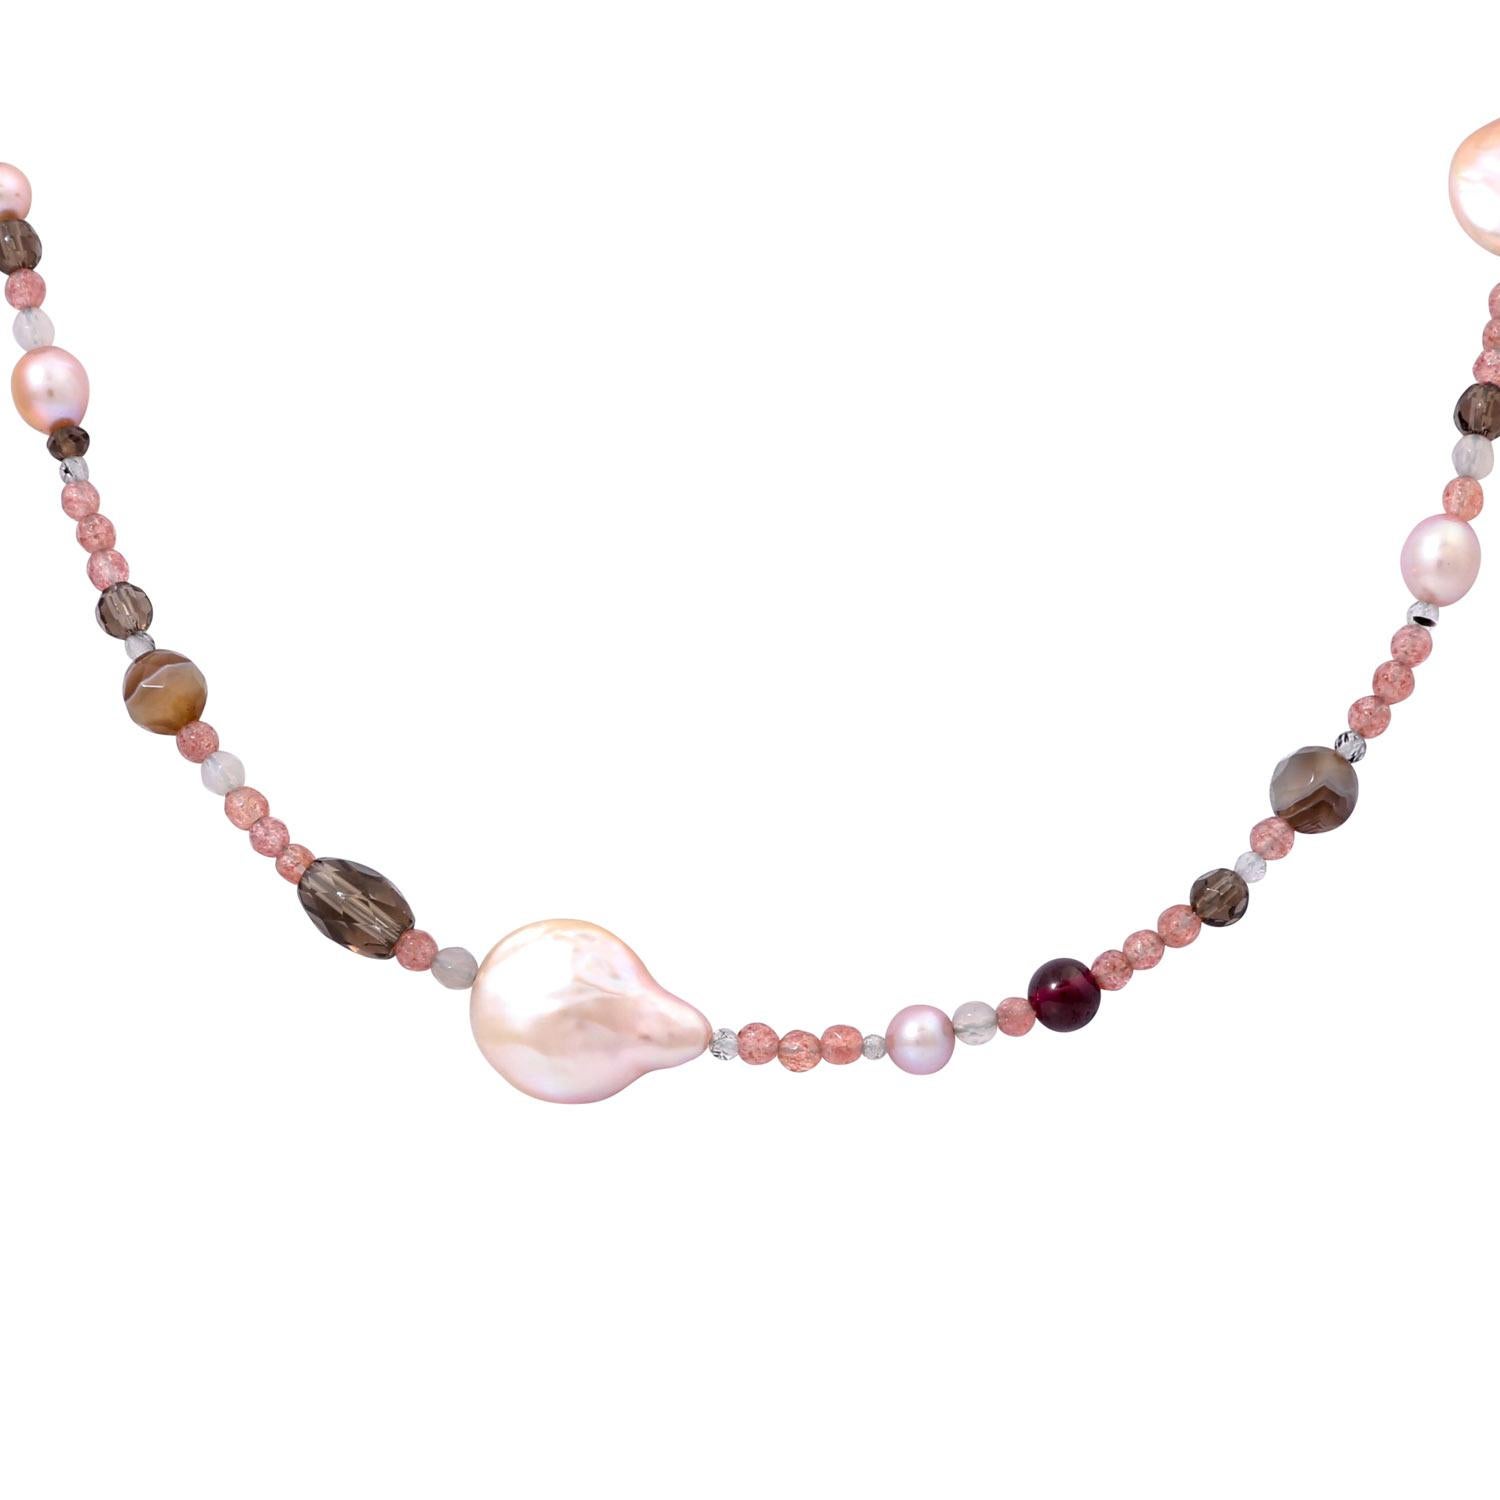 in various cuts, sun stones, quartz and pink freshwater cultured pearls, magnetic clasp 925 silver gold-plated, L: 45.5cm, 21st century, as new. (2)

 Gemstone necklace with agates in different cuts, sunstones, quartz and rose freshwater cultured